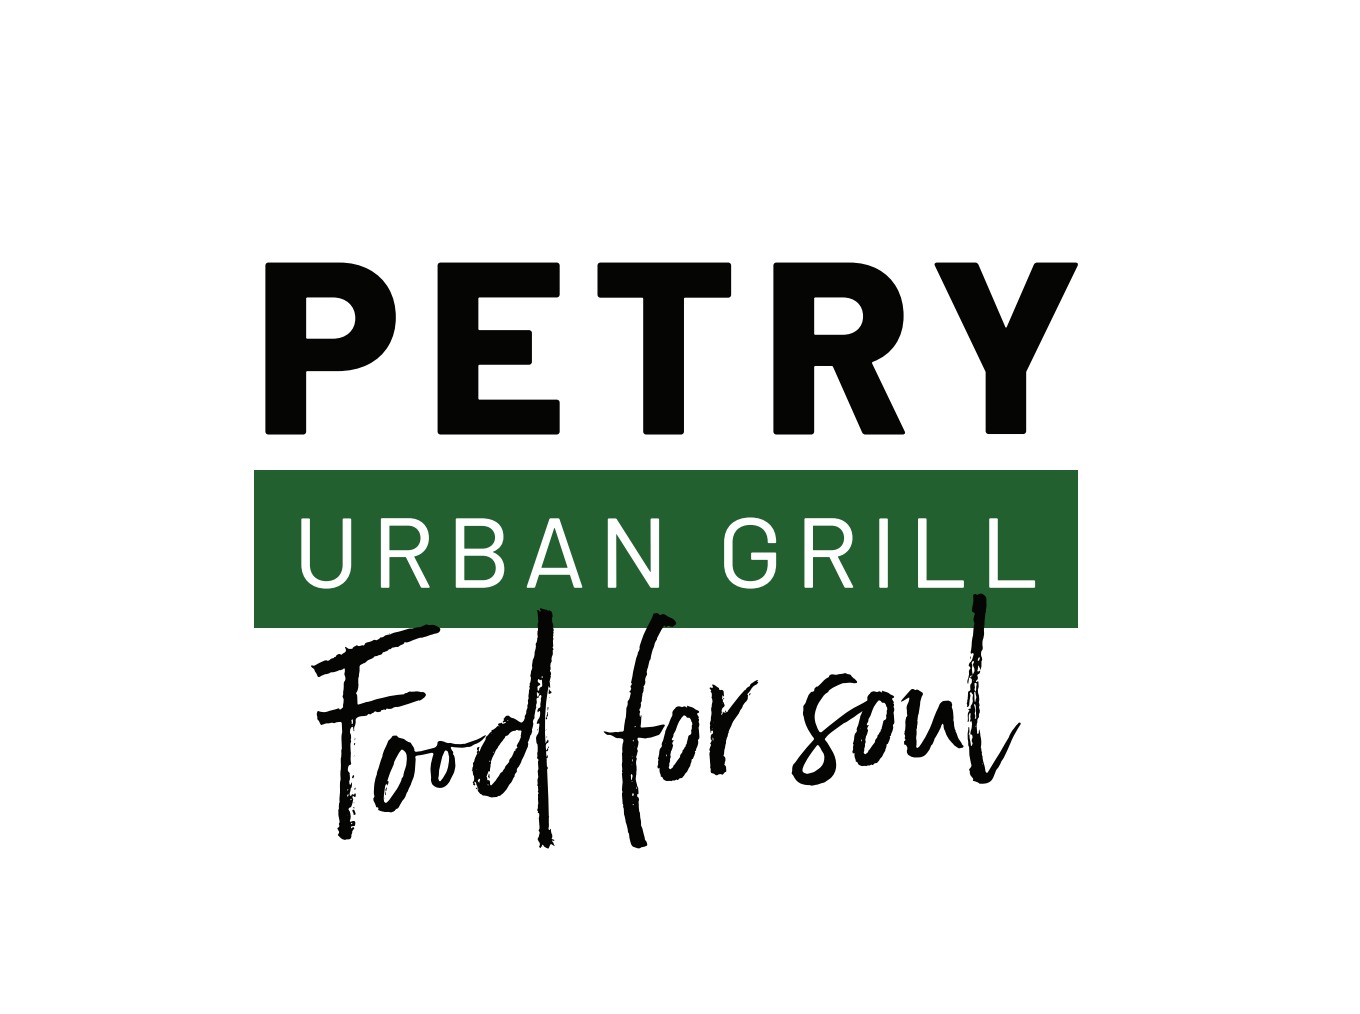 PETRY URBAN GRILL